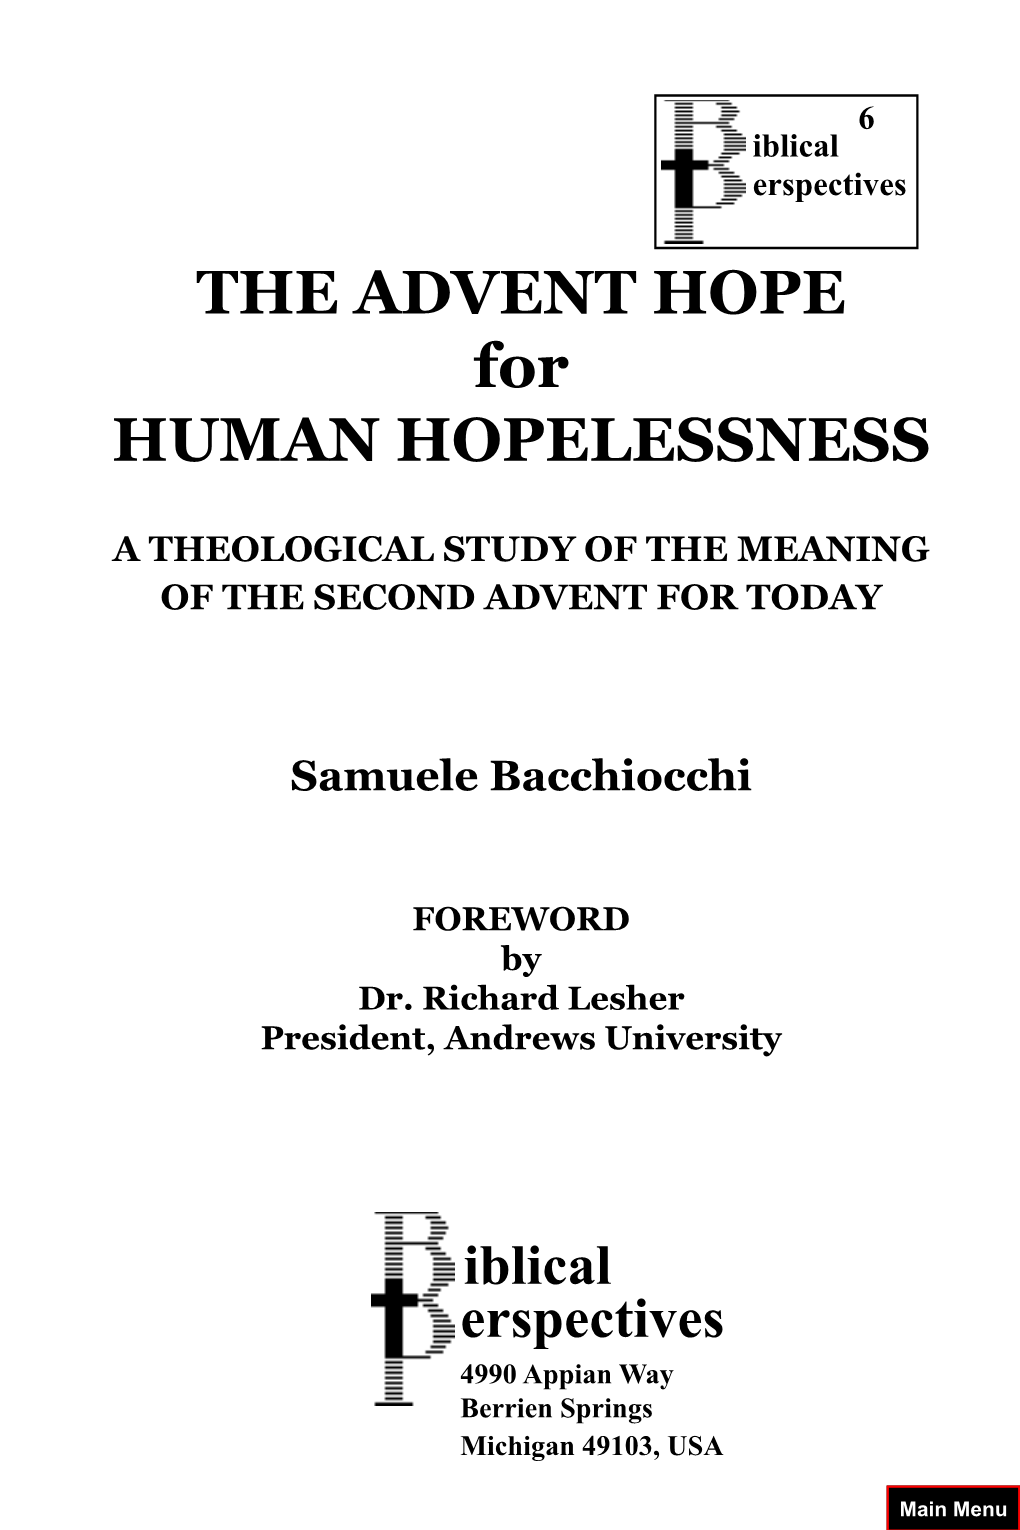 THE ADVENT HOPE for HUMAN HOPELESSNESS